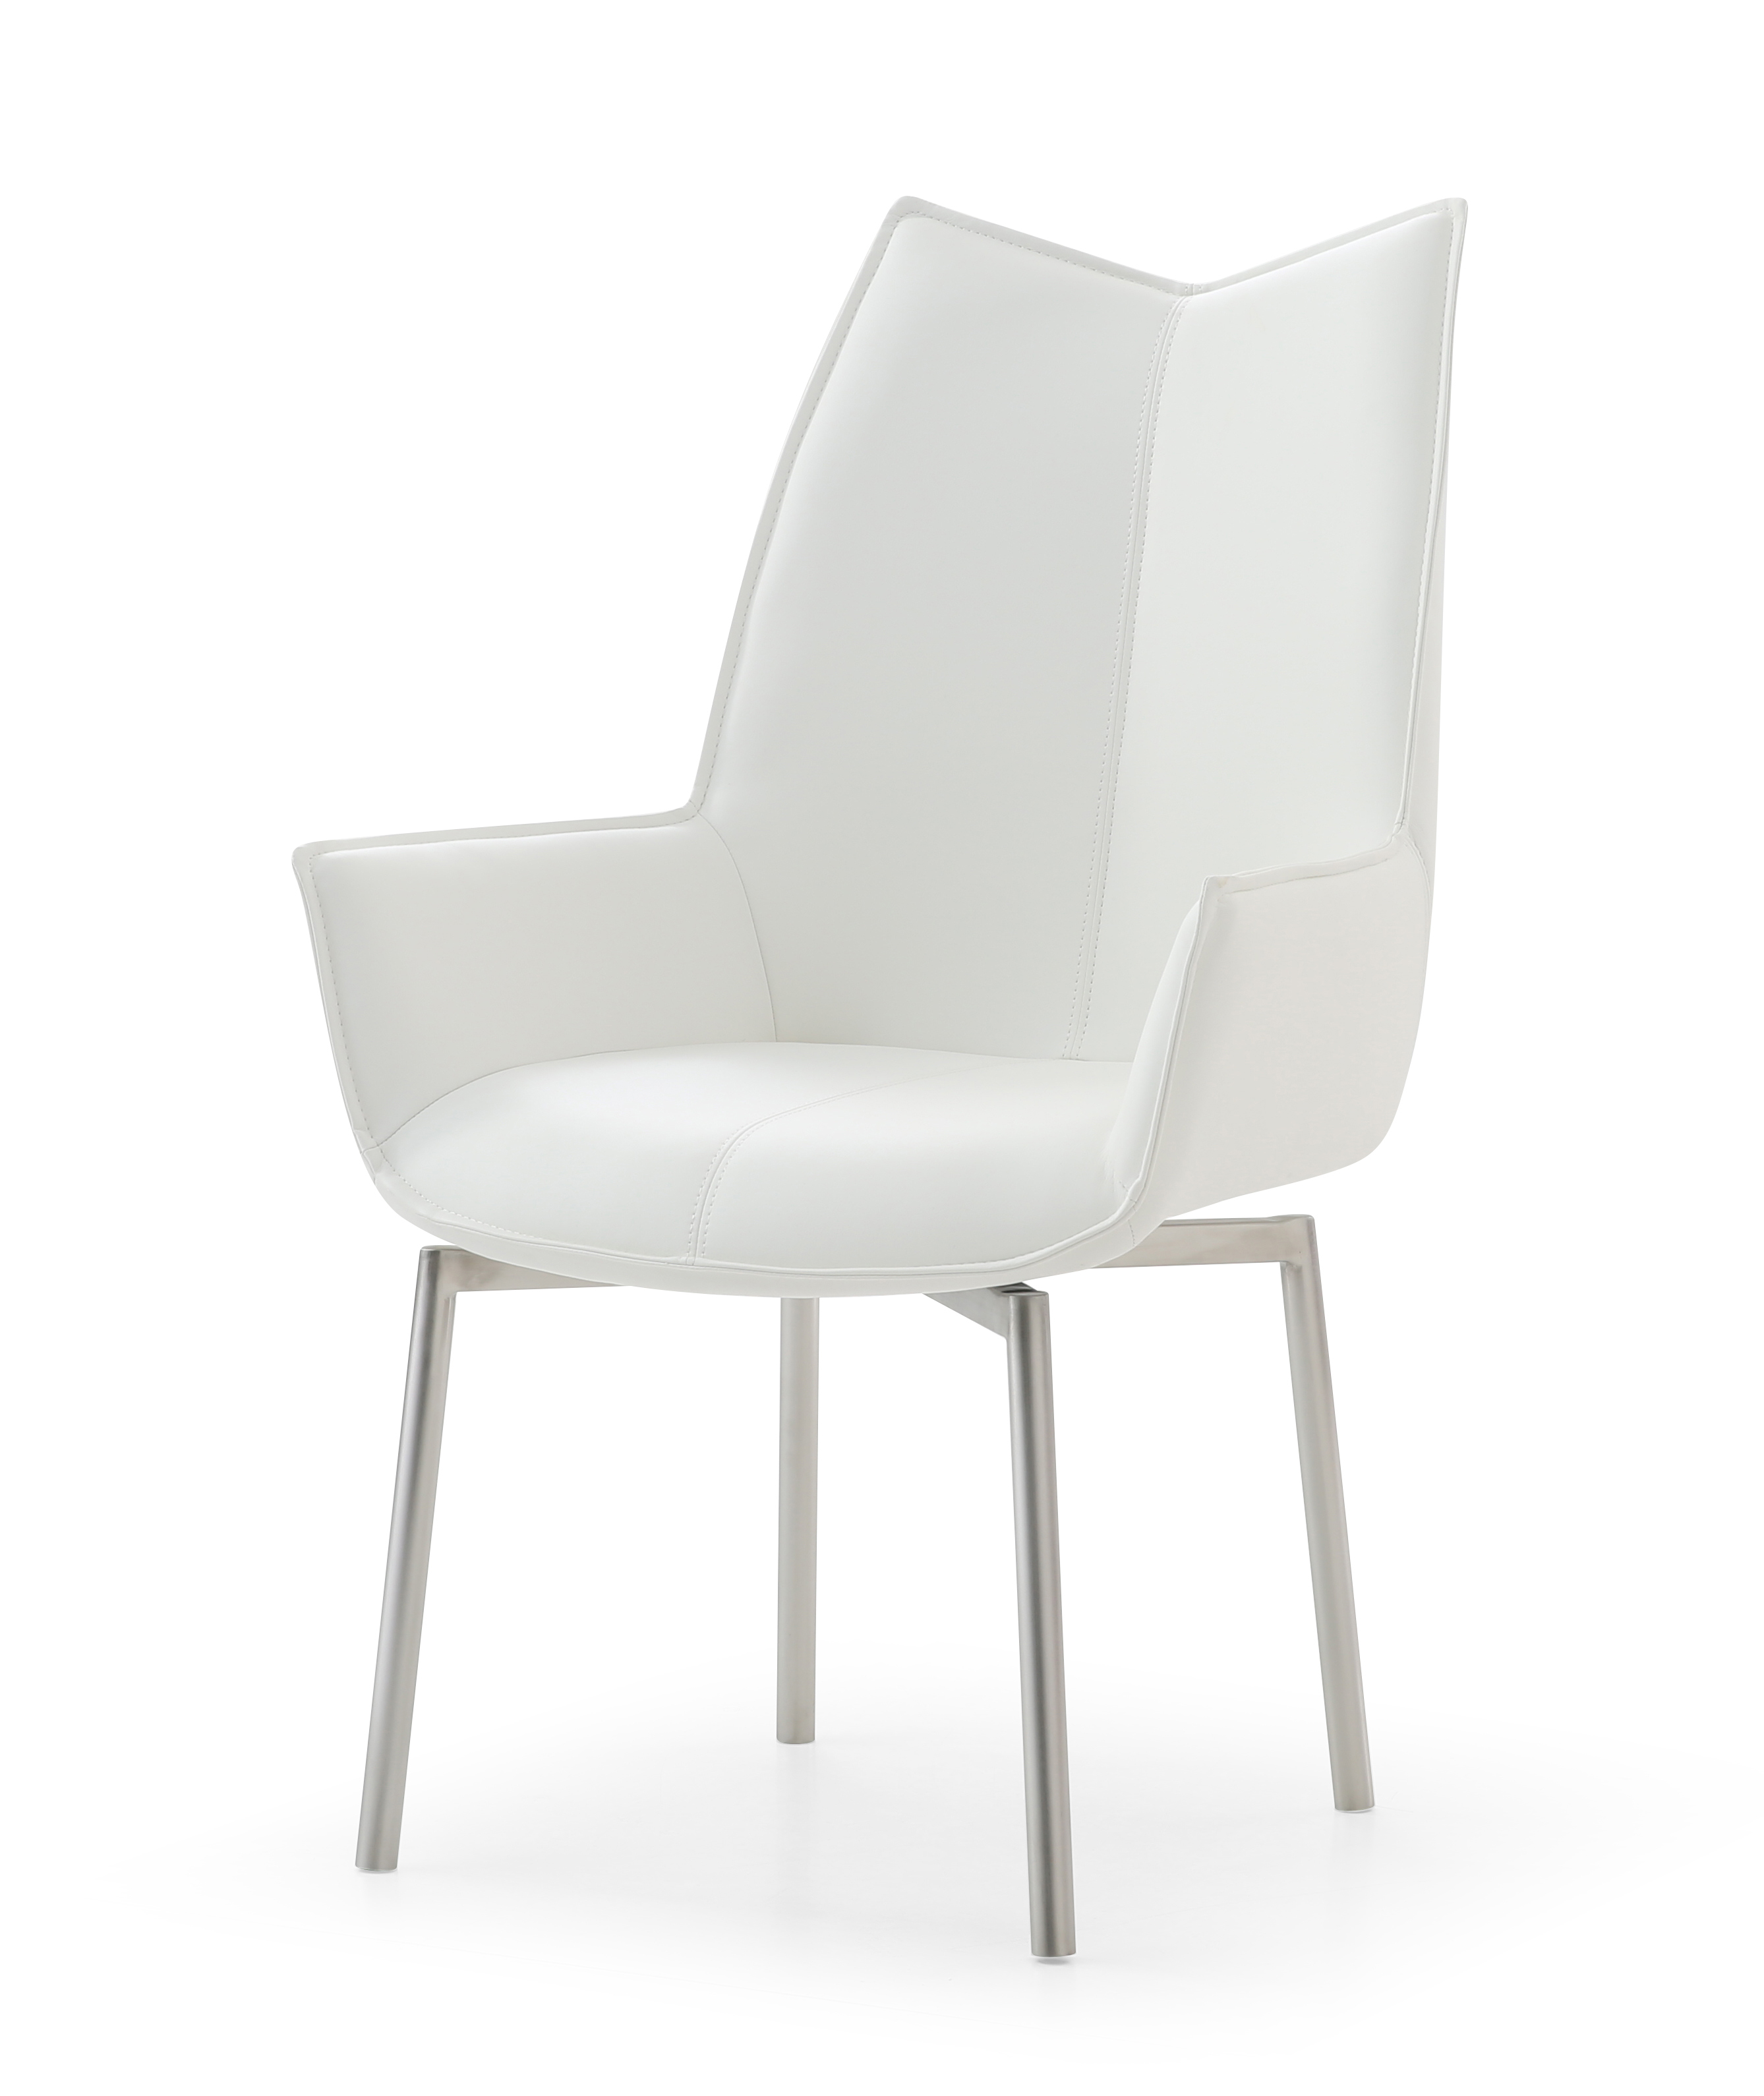 Dining Room Furniture Tables 1218 swivel dining chair White